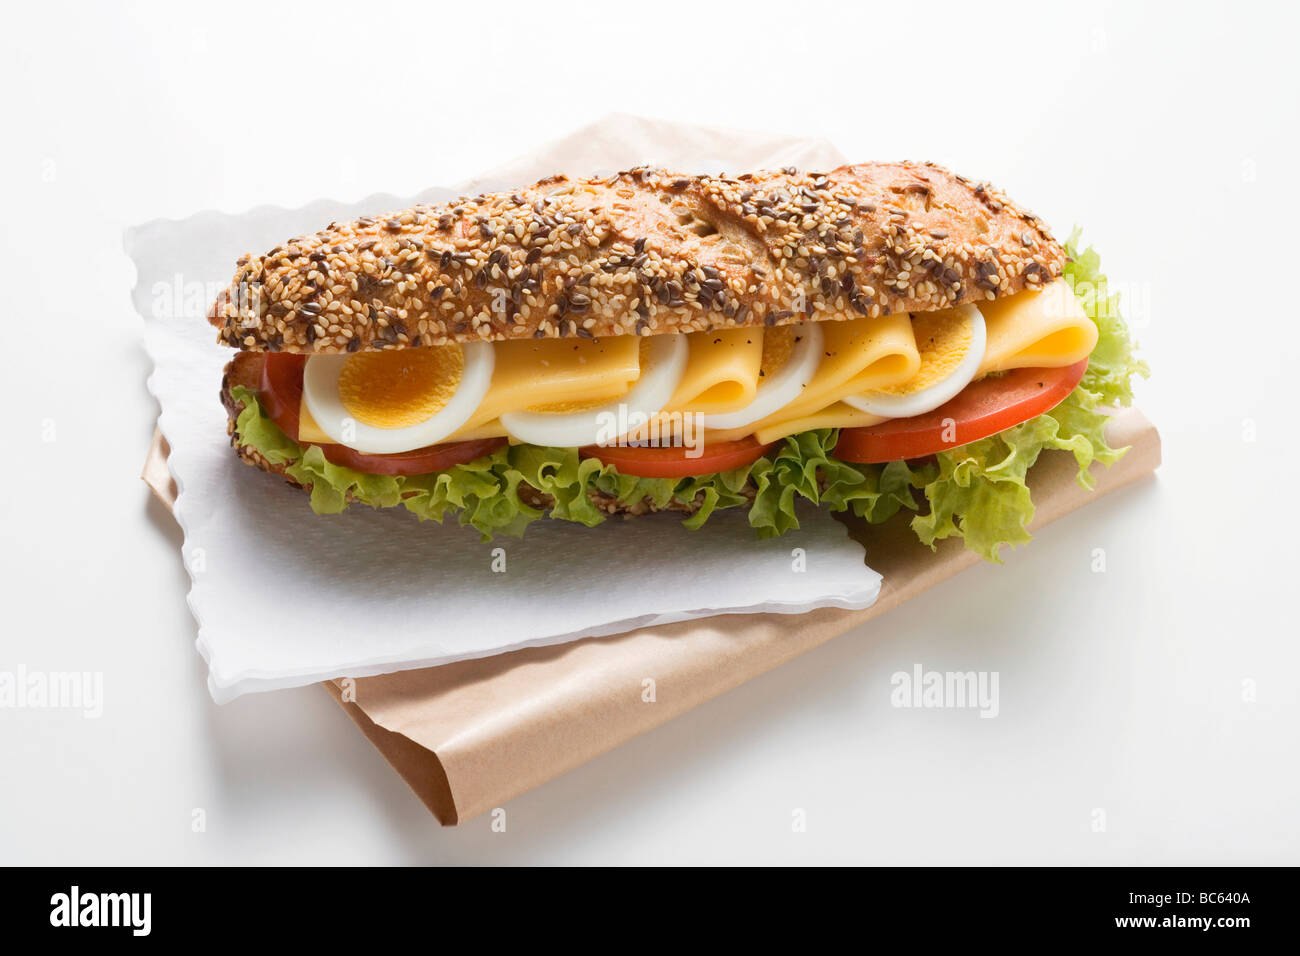 Granary roll filled with egg, cheese, tomato and lettuce - Stock Photo